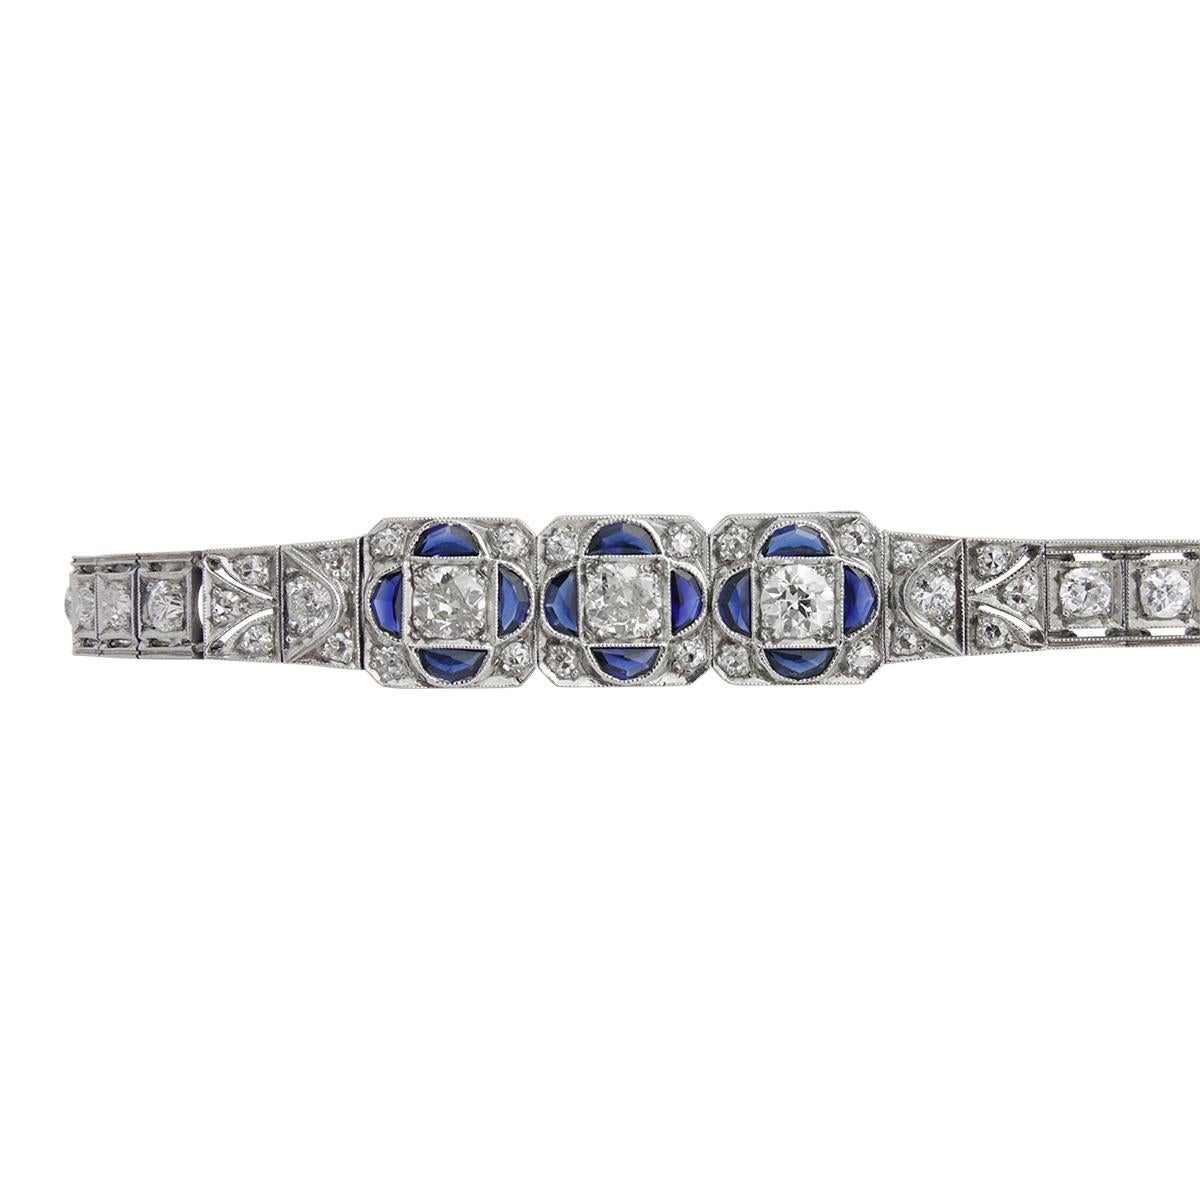 Typical of the Art Deco era, these fabulous diamond bracelets were customary with any outfit. Stacked up on the wrist, this is the epitome of the period. This gorgeous bracelet has so much detail, beautifully fine millgrain work around each diamond